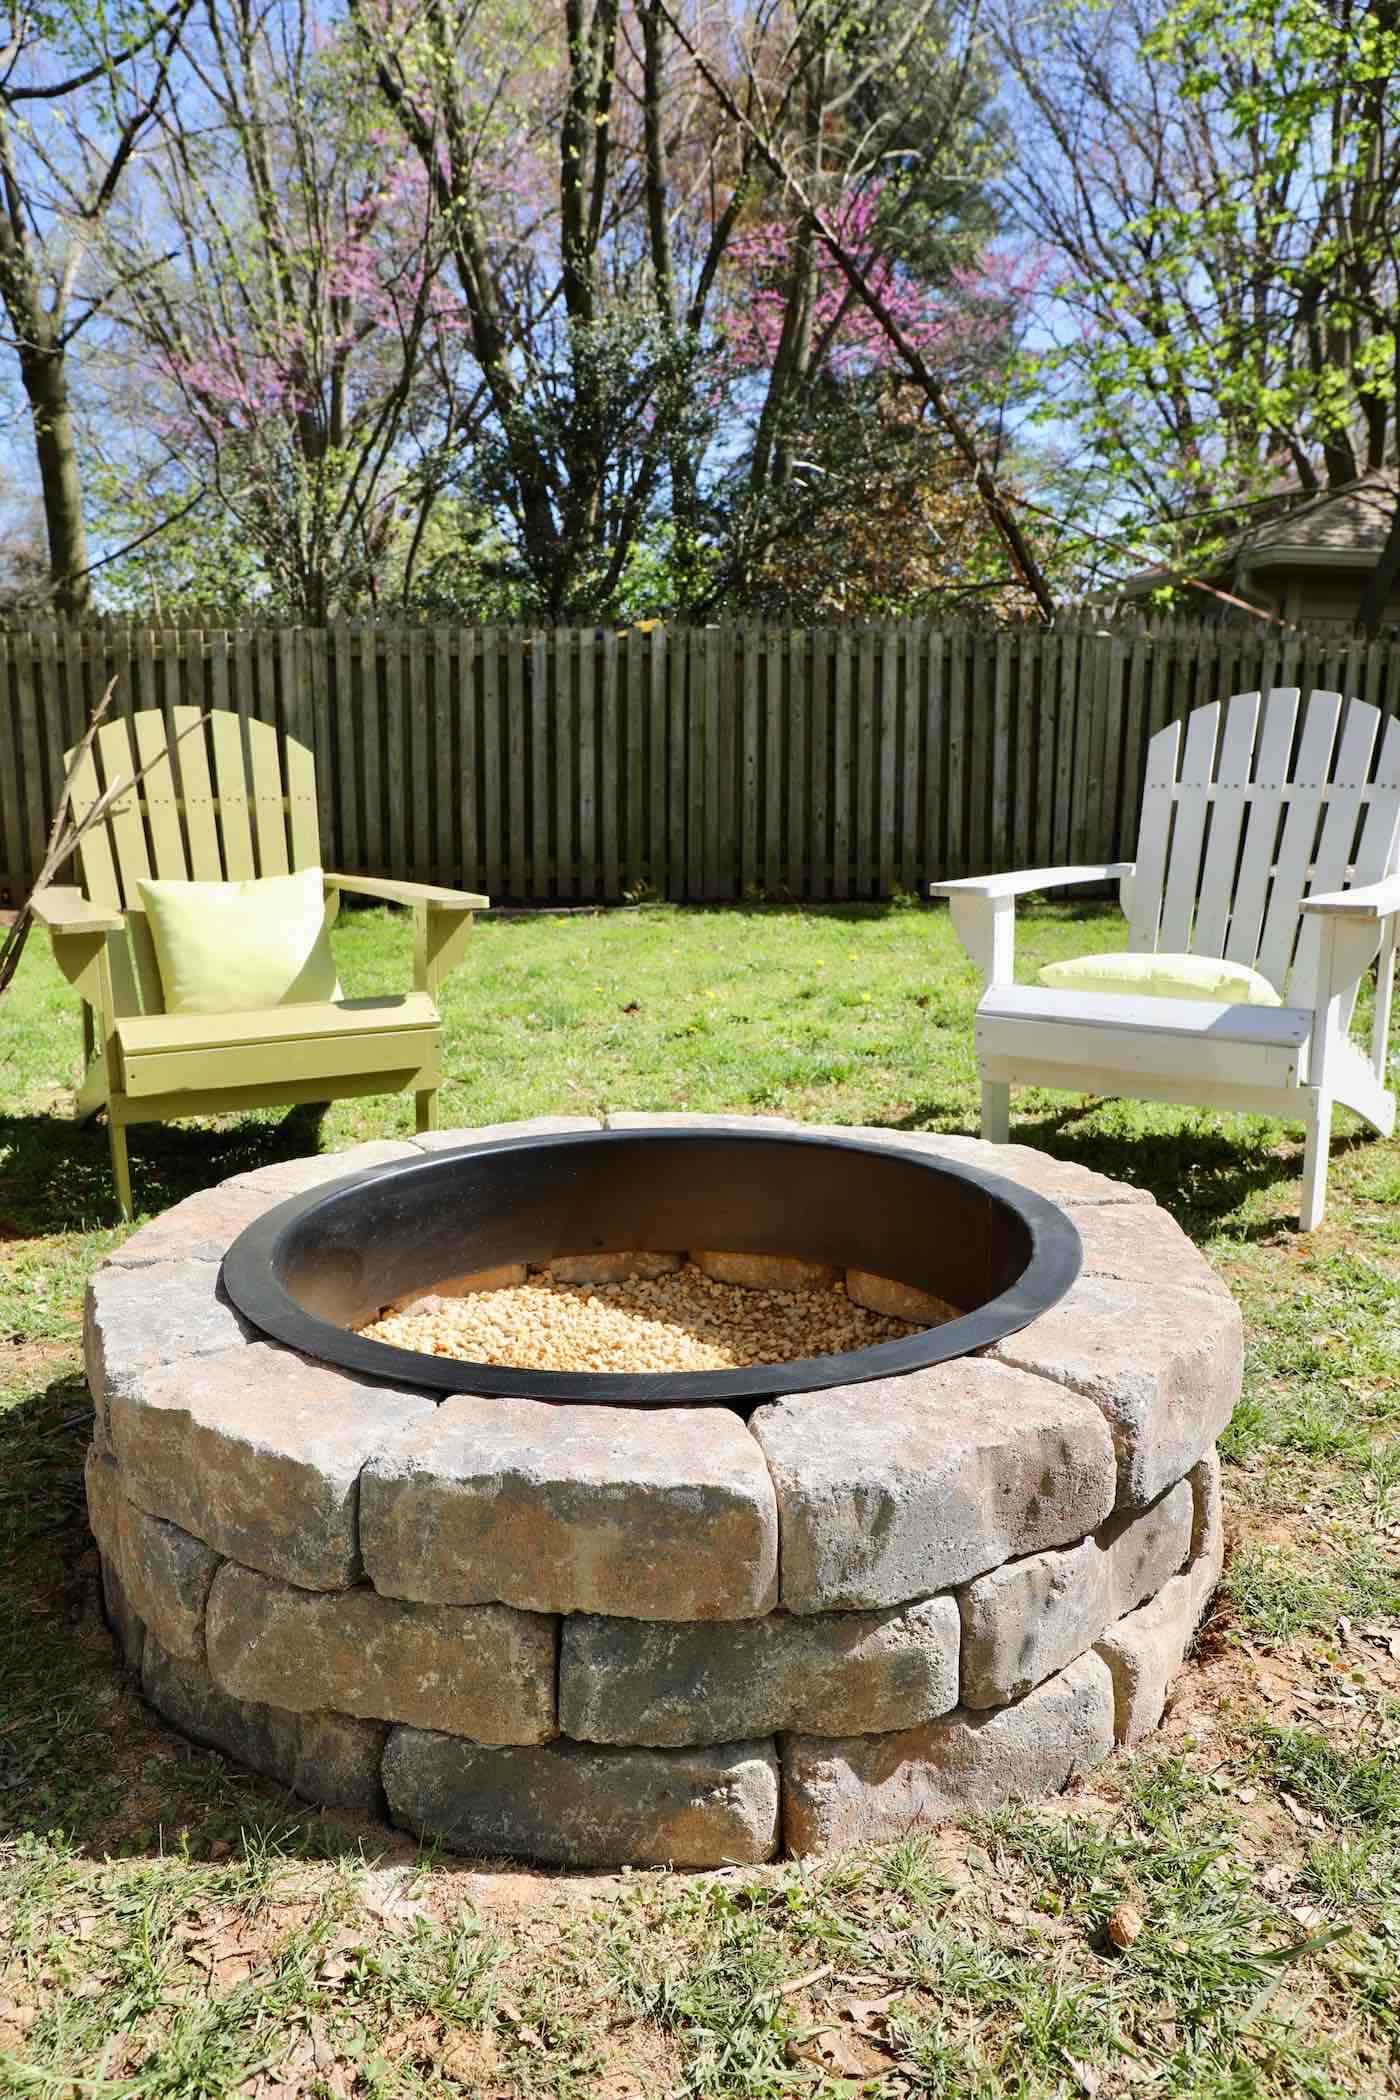 Diy Fire Pit With Gravel Stones, How To Make Your Own Fire Pit Screen